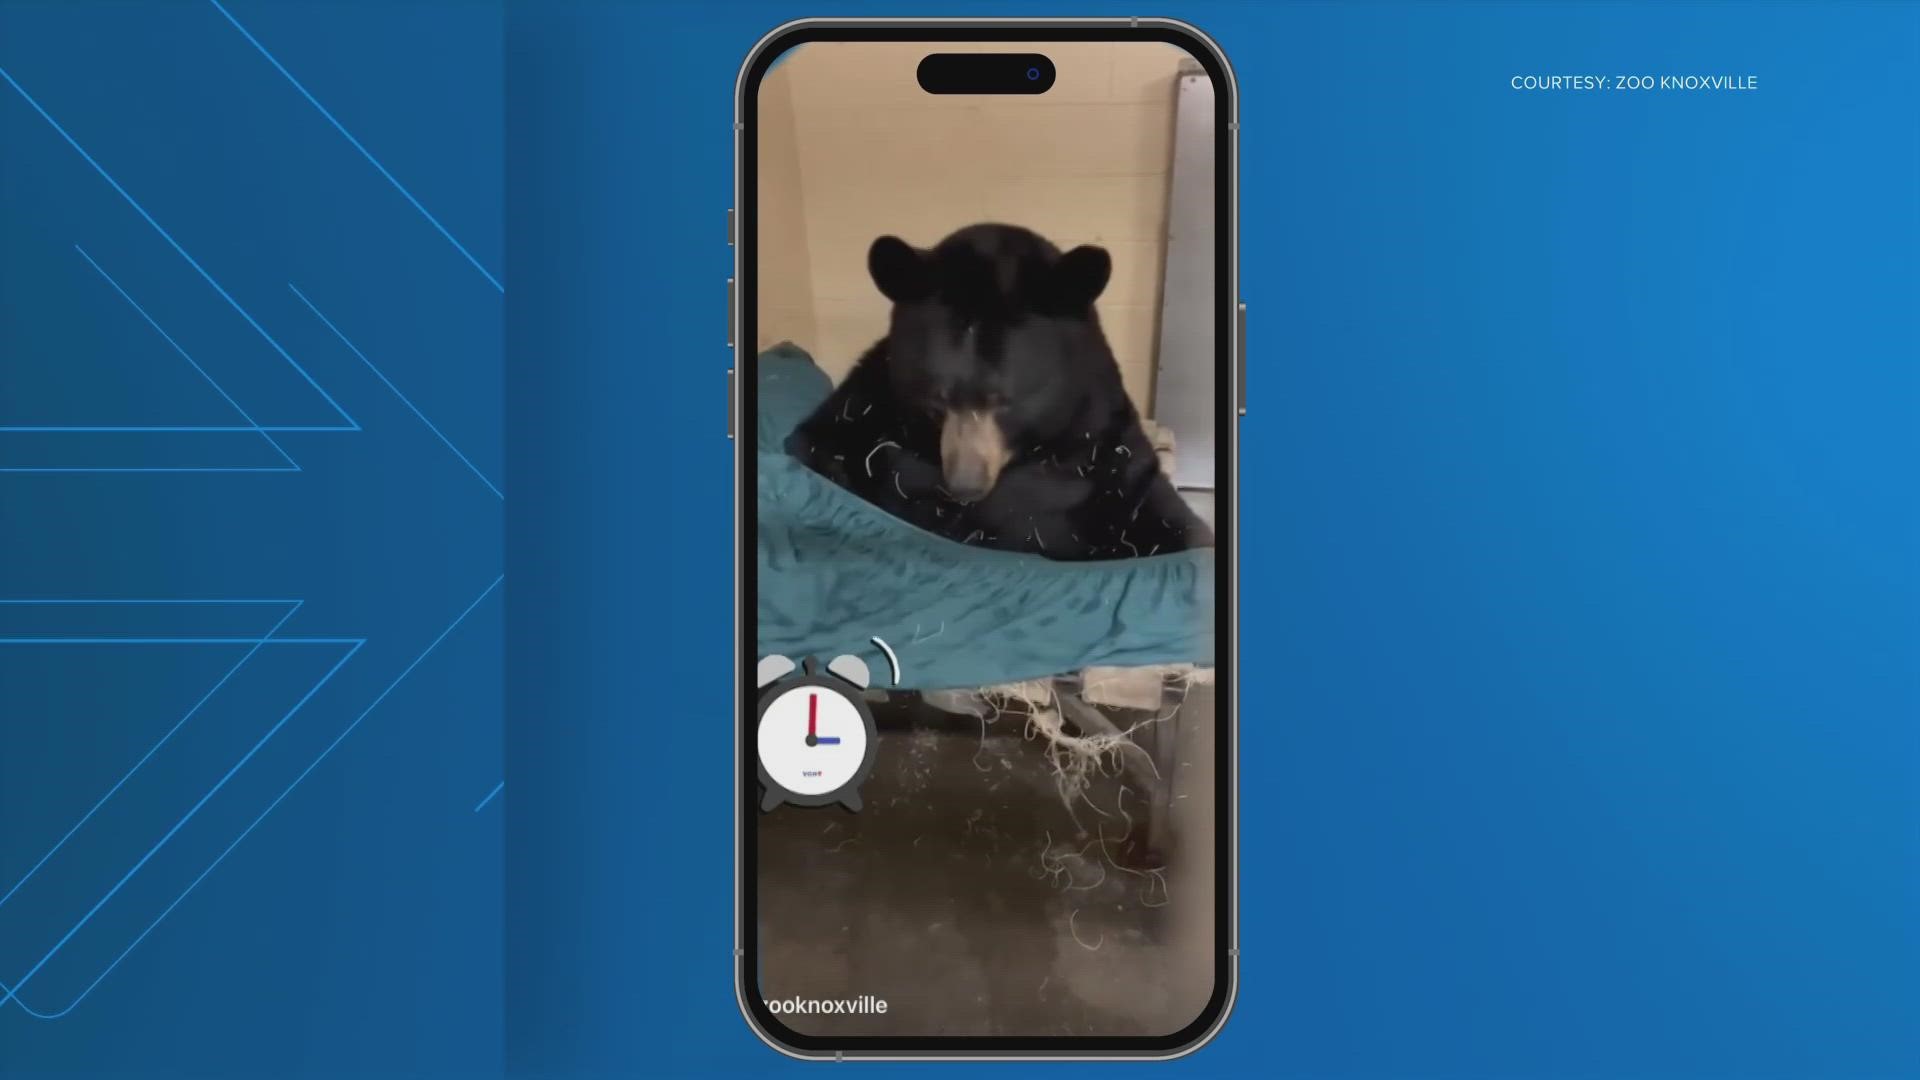 Zoo Knoxville shared a video of one of their Black bears "bearly" getting out of bed when the alarm goes off.